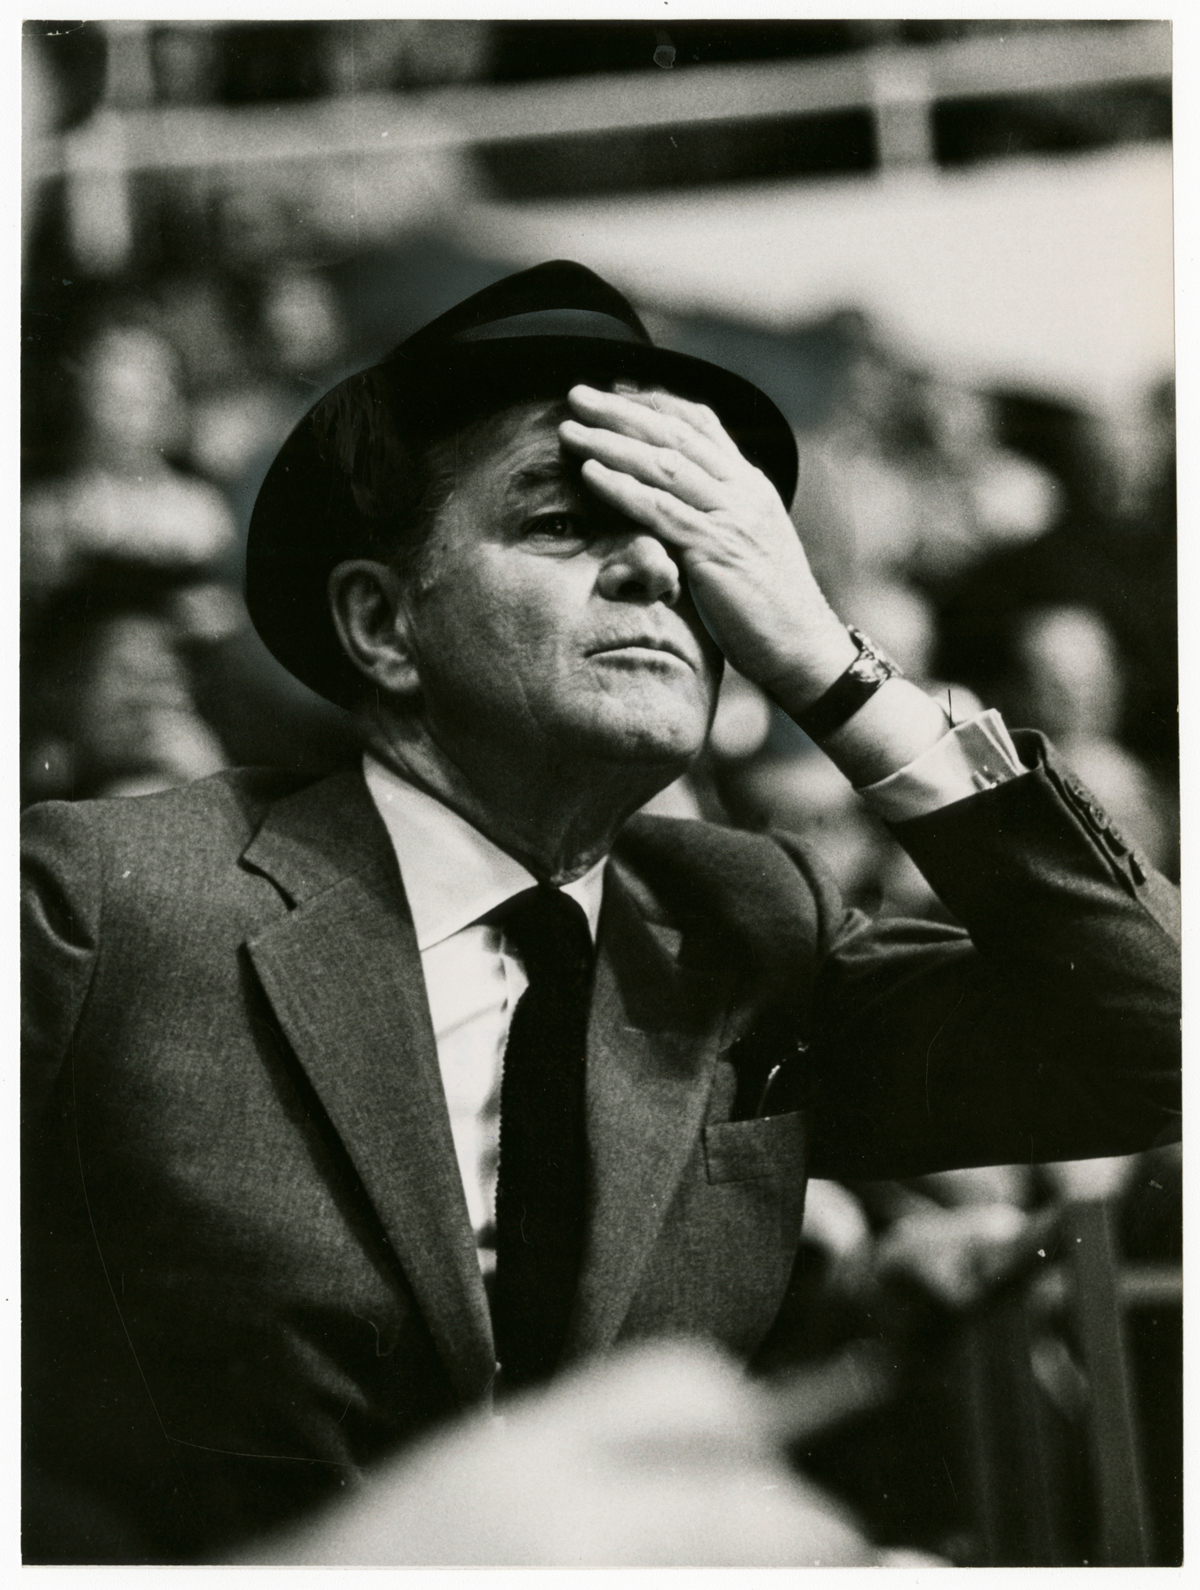     Fred Ross, Jack Kent Cooke, sports team owner, 1967. Gelatin silver print, 9 x 7&#8243;. Gift of The Globe and Mail newspaper to the Canadian Photography Institute of the National Gallery of Canada.

